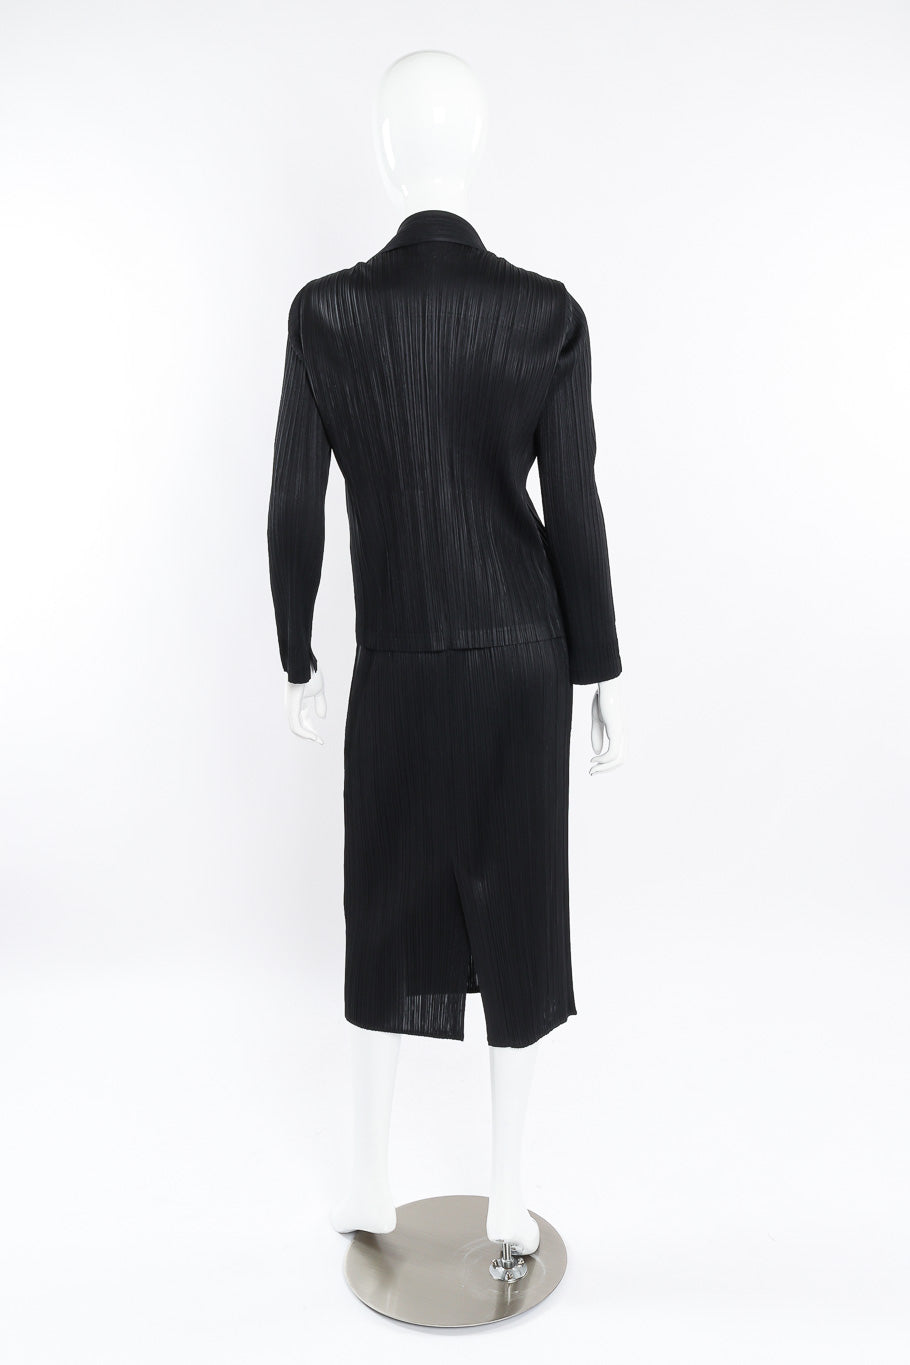 Pleated skirt, top, and jacket set by Issey Miyake on mannequin back @recessla